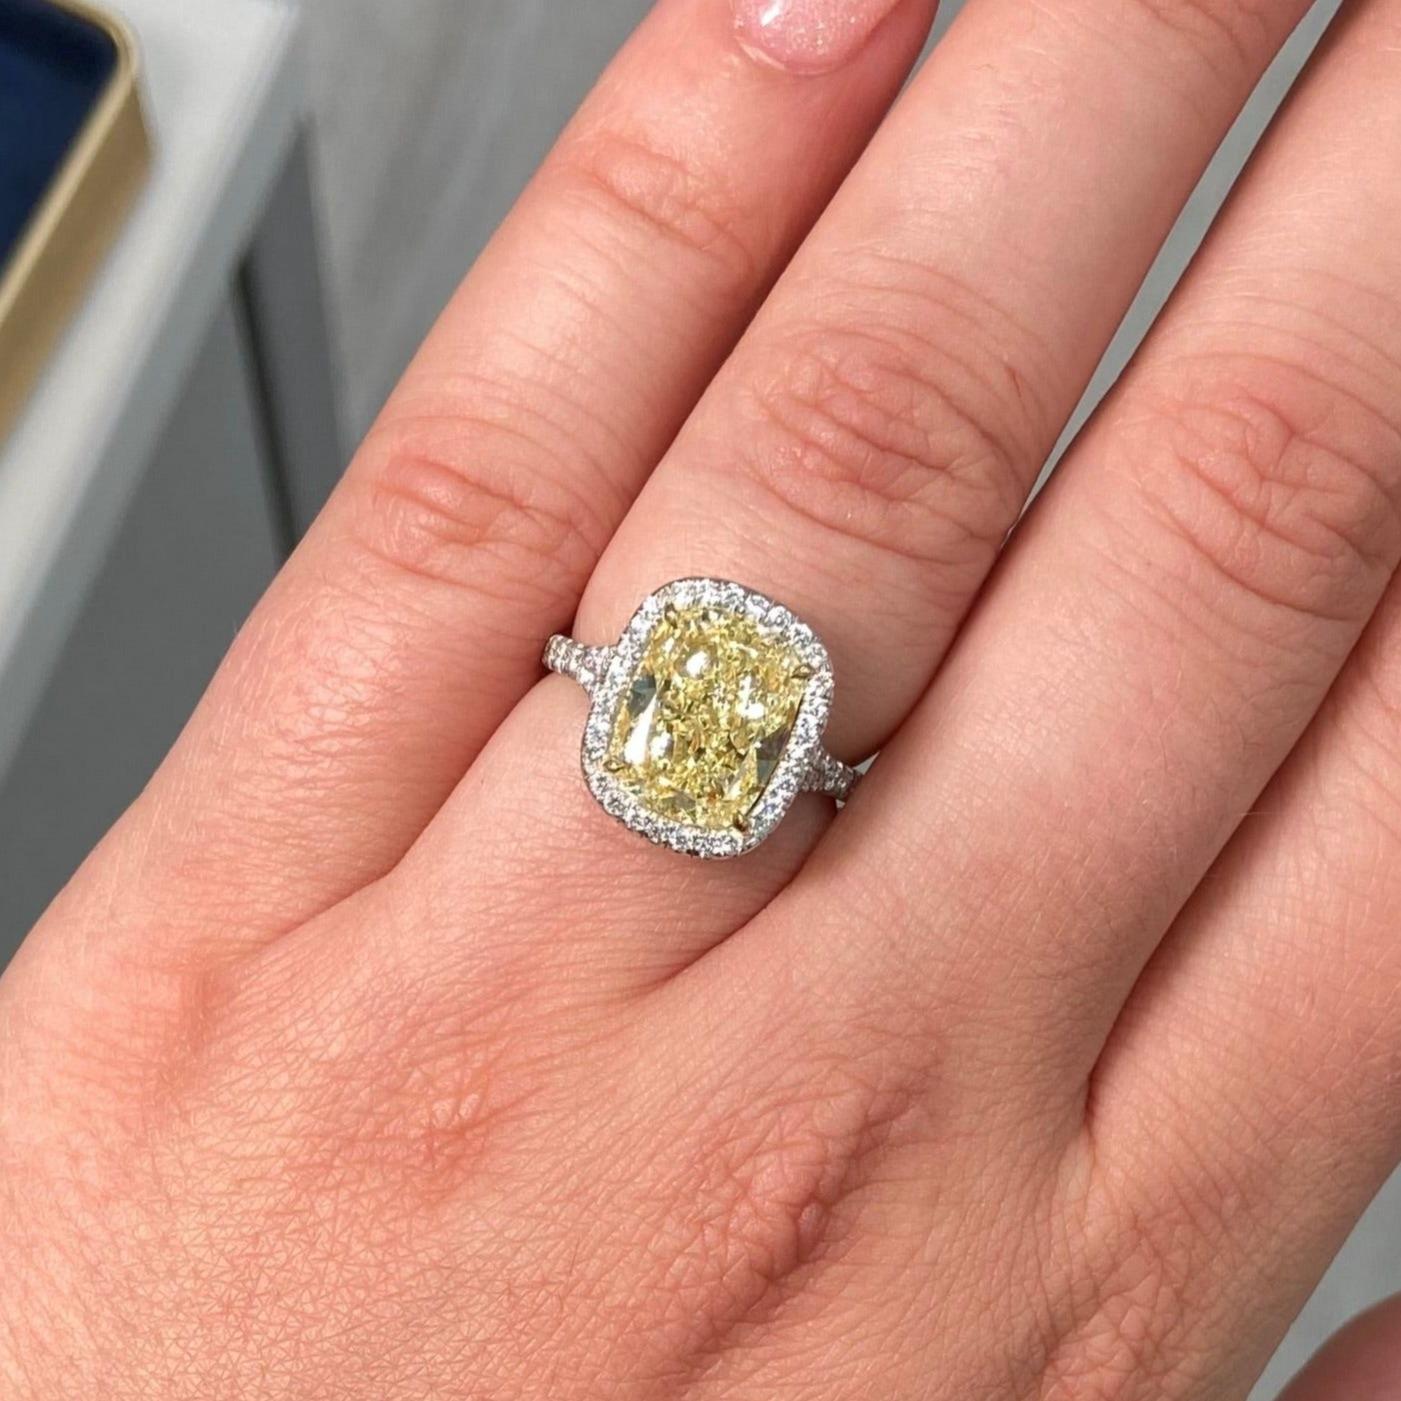 4.73 Carat Center Diamond
GIA Light Yellow
VS2 Clarity 
Cushion Cut Diamond 
0.52 Carats of White Rounds 
Set in Platinum and 18k Gold 
Split Shank band 
Handmade in NYC
GIA Certified Diamond 


This piece can be viewed before purchase in our